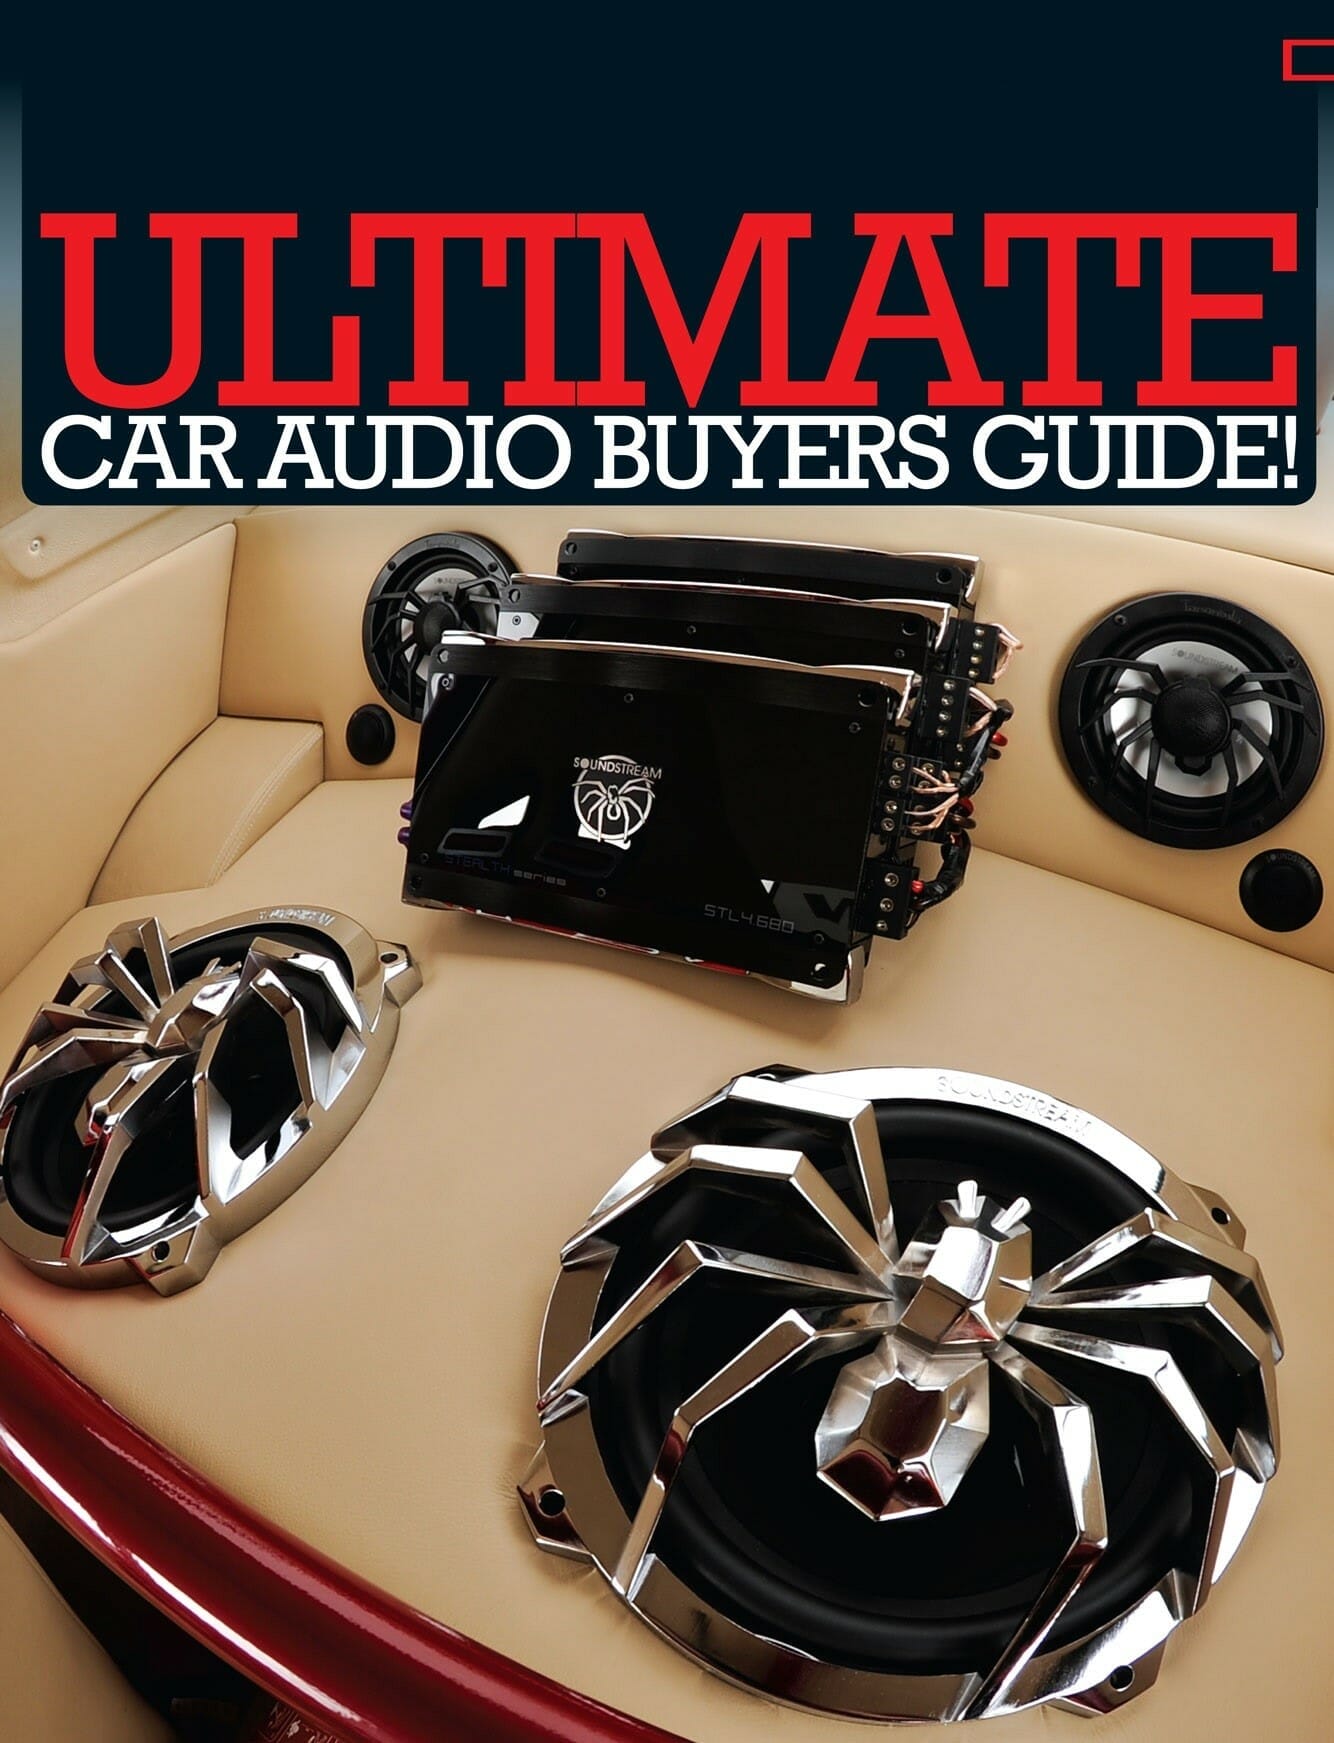 A Complete guide for buying Car Audio – Part II